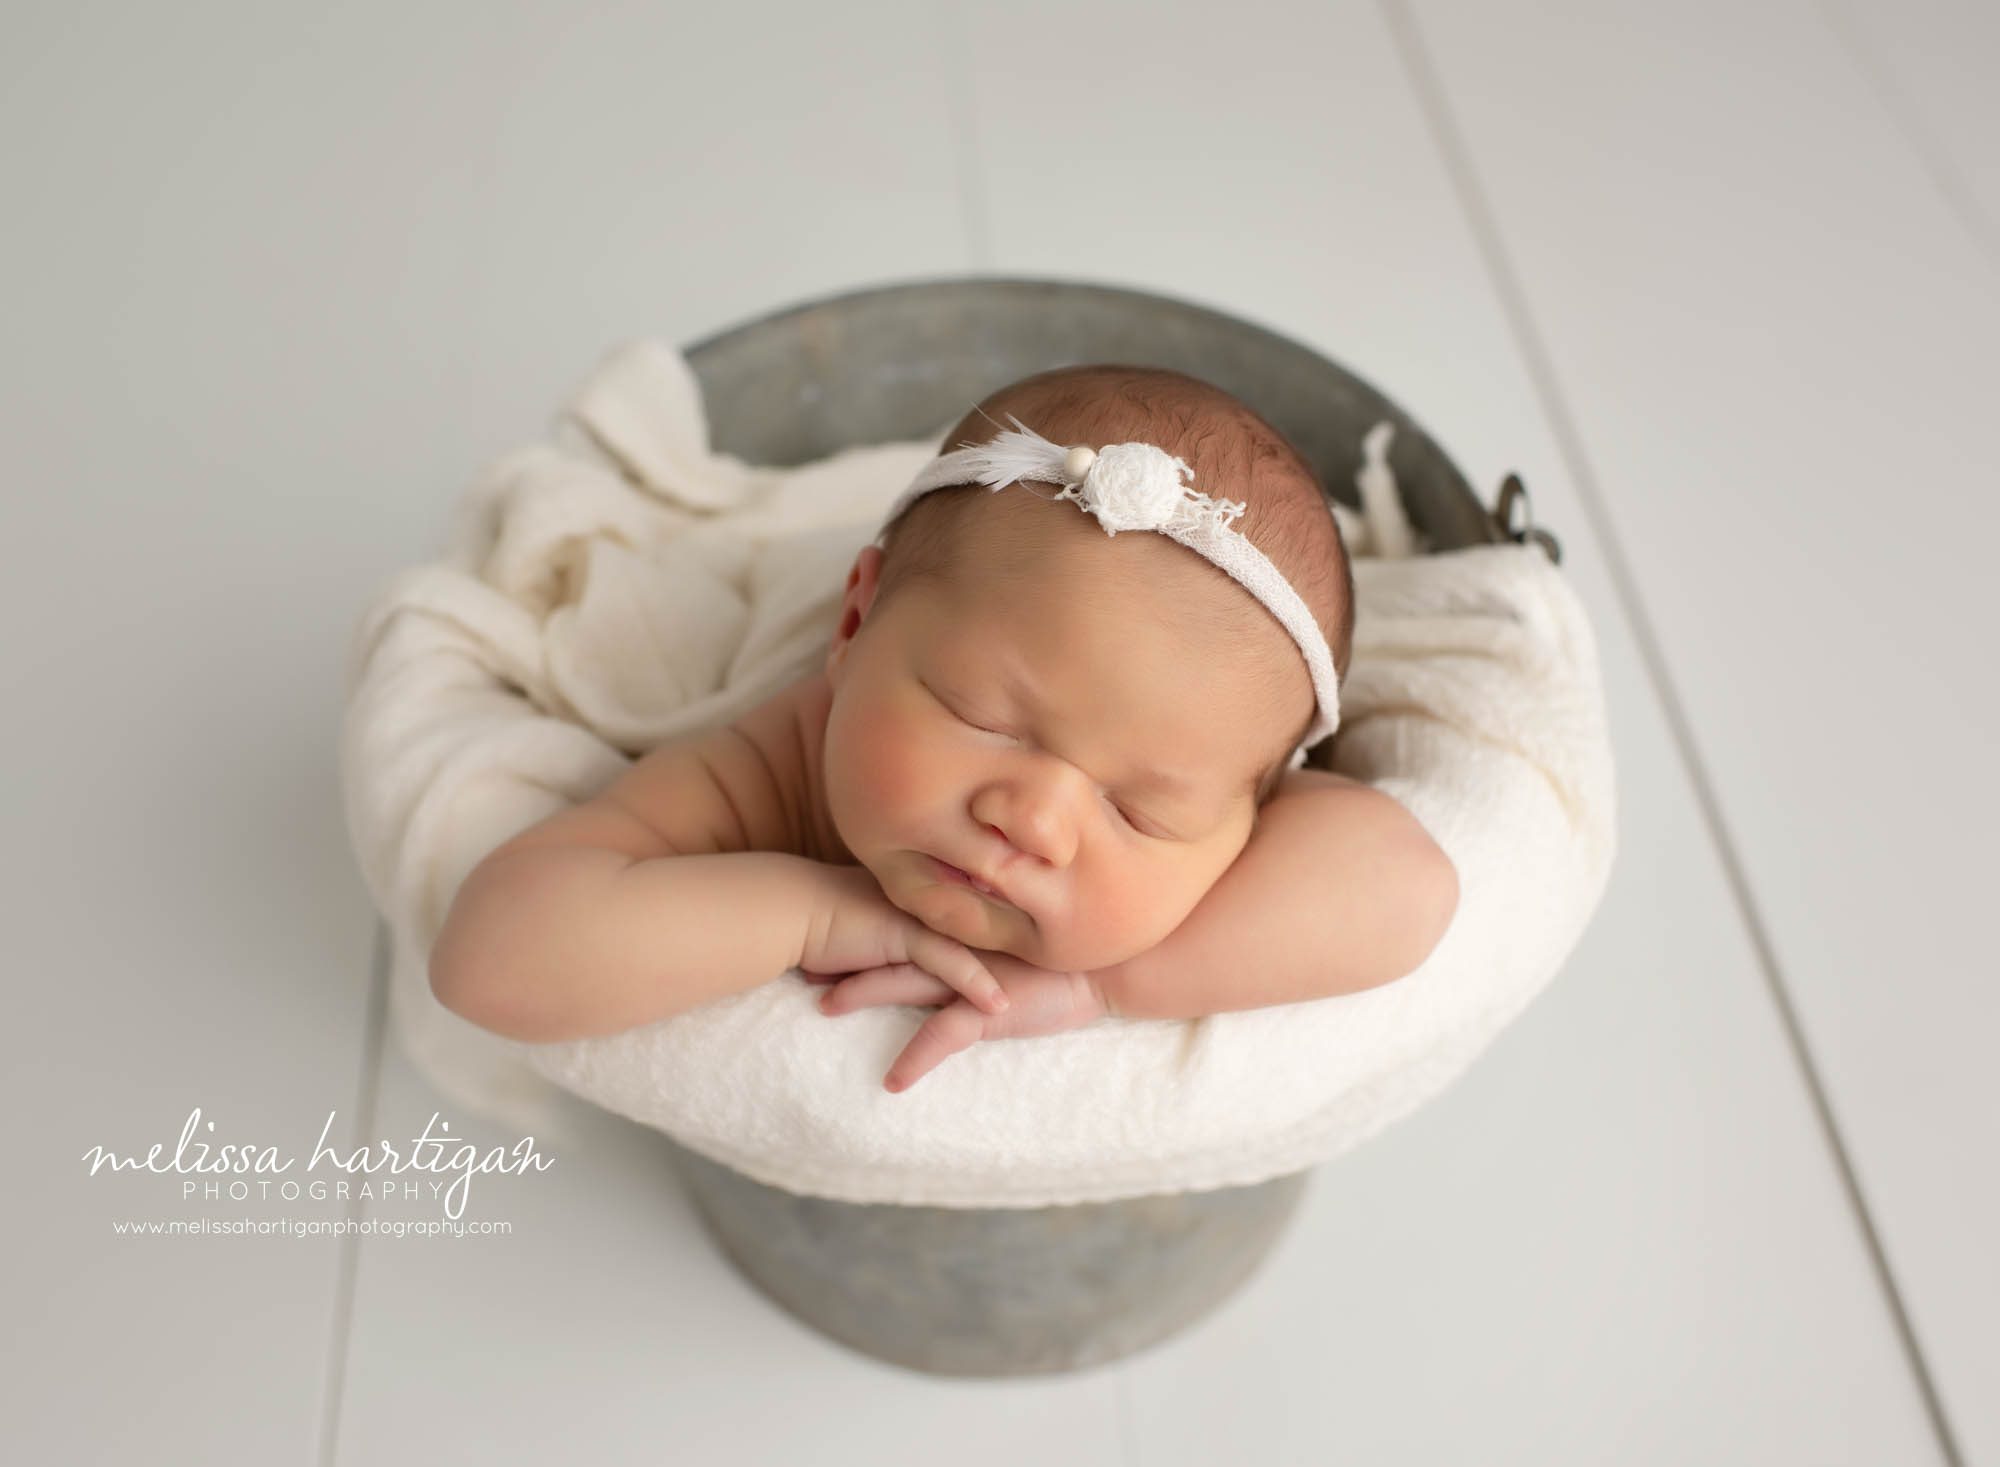 Newborn baby girl posed in metal bucket with cream colored wrap and headband CT newborn Photography